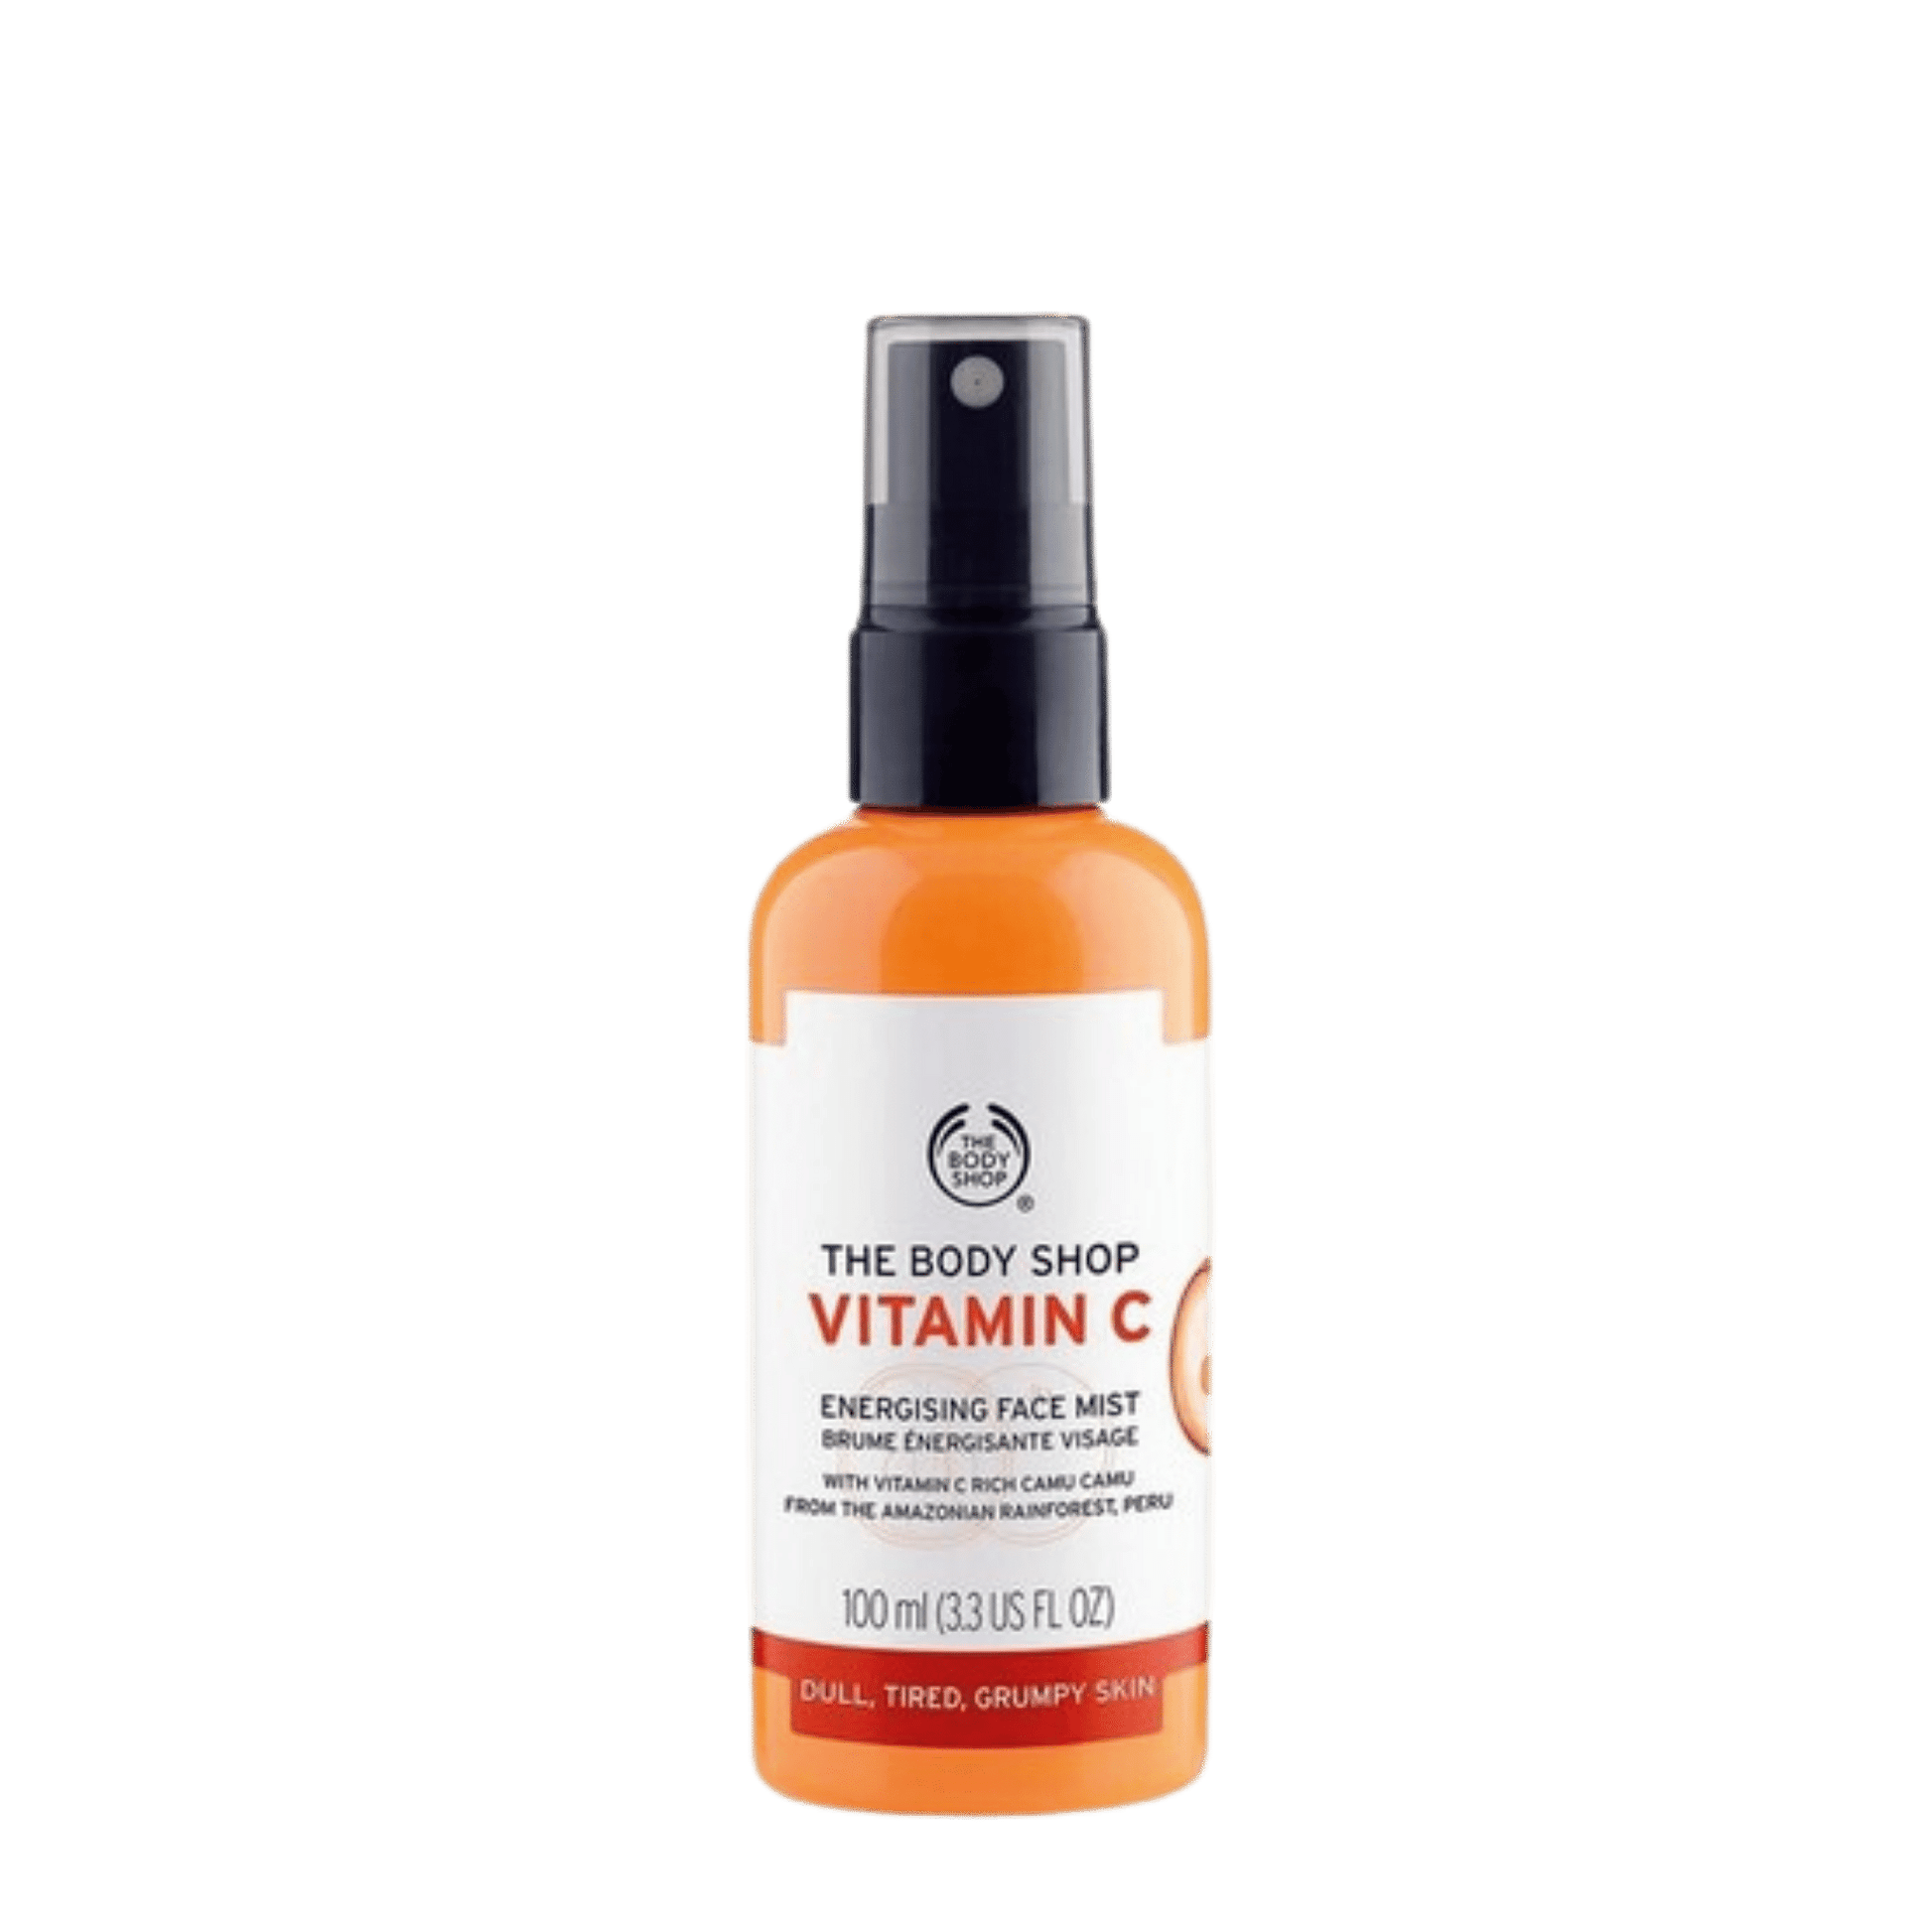 The Body Shop Vitamin C Energising Face Mist Is Now Available In Normal Price!